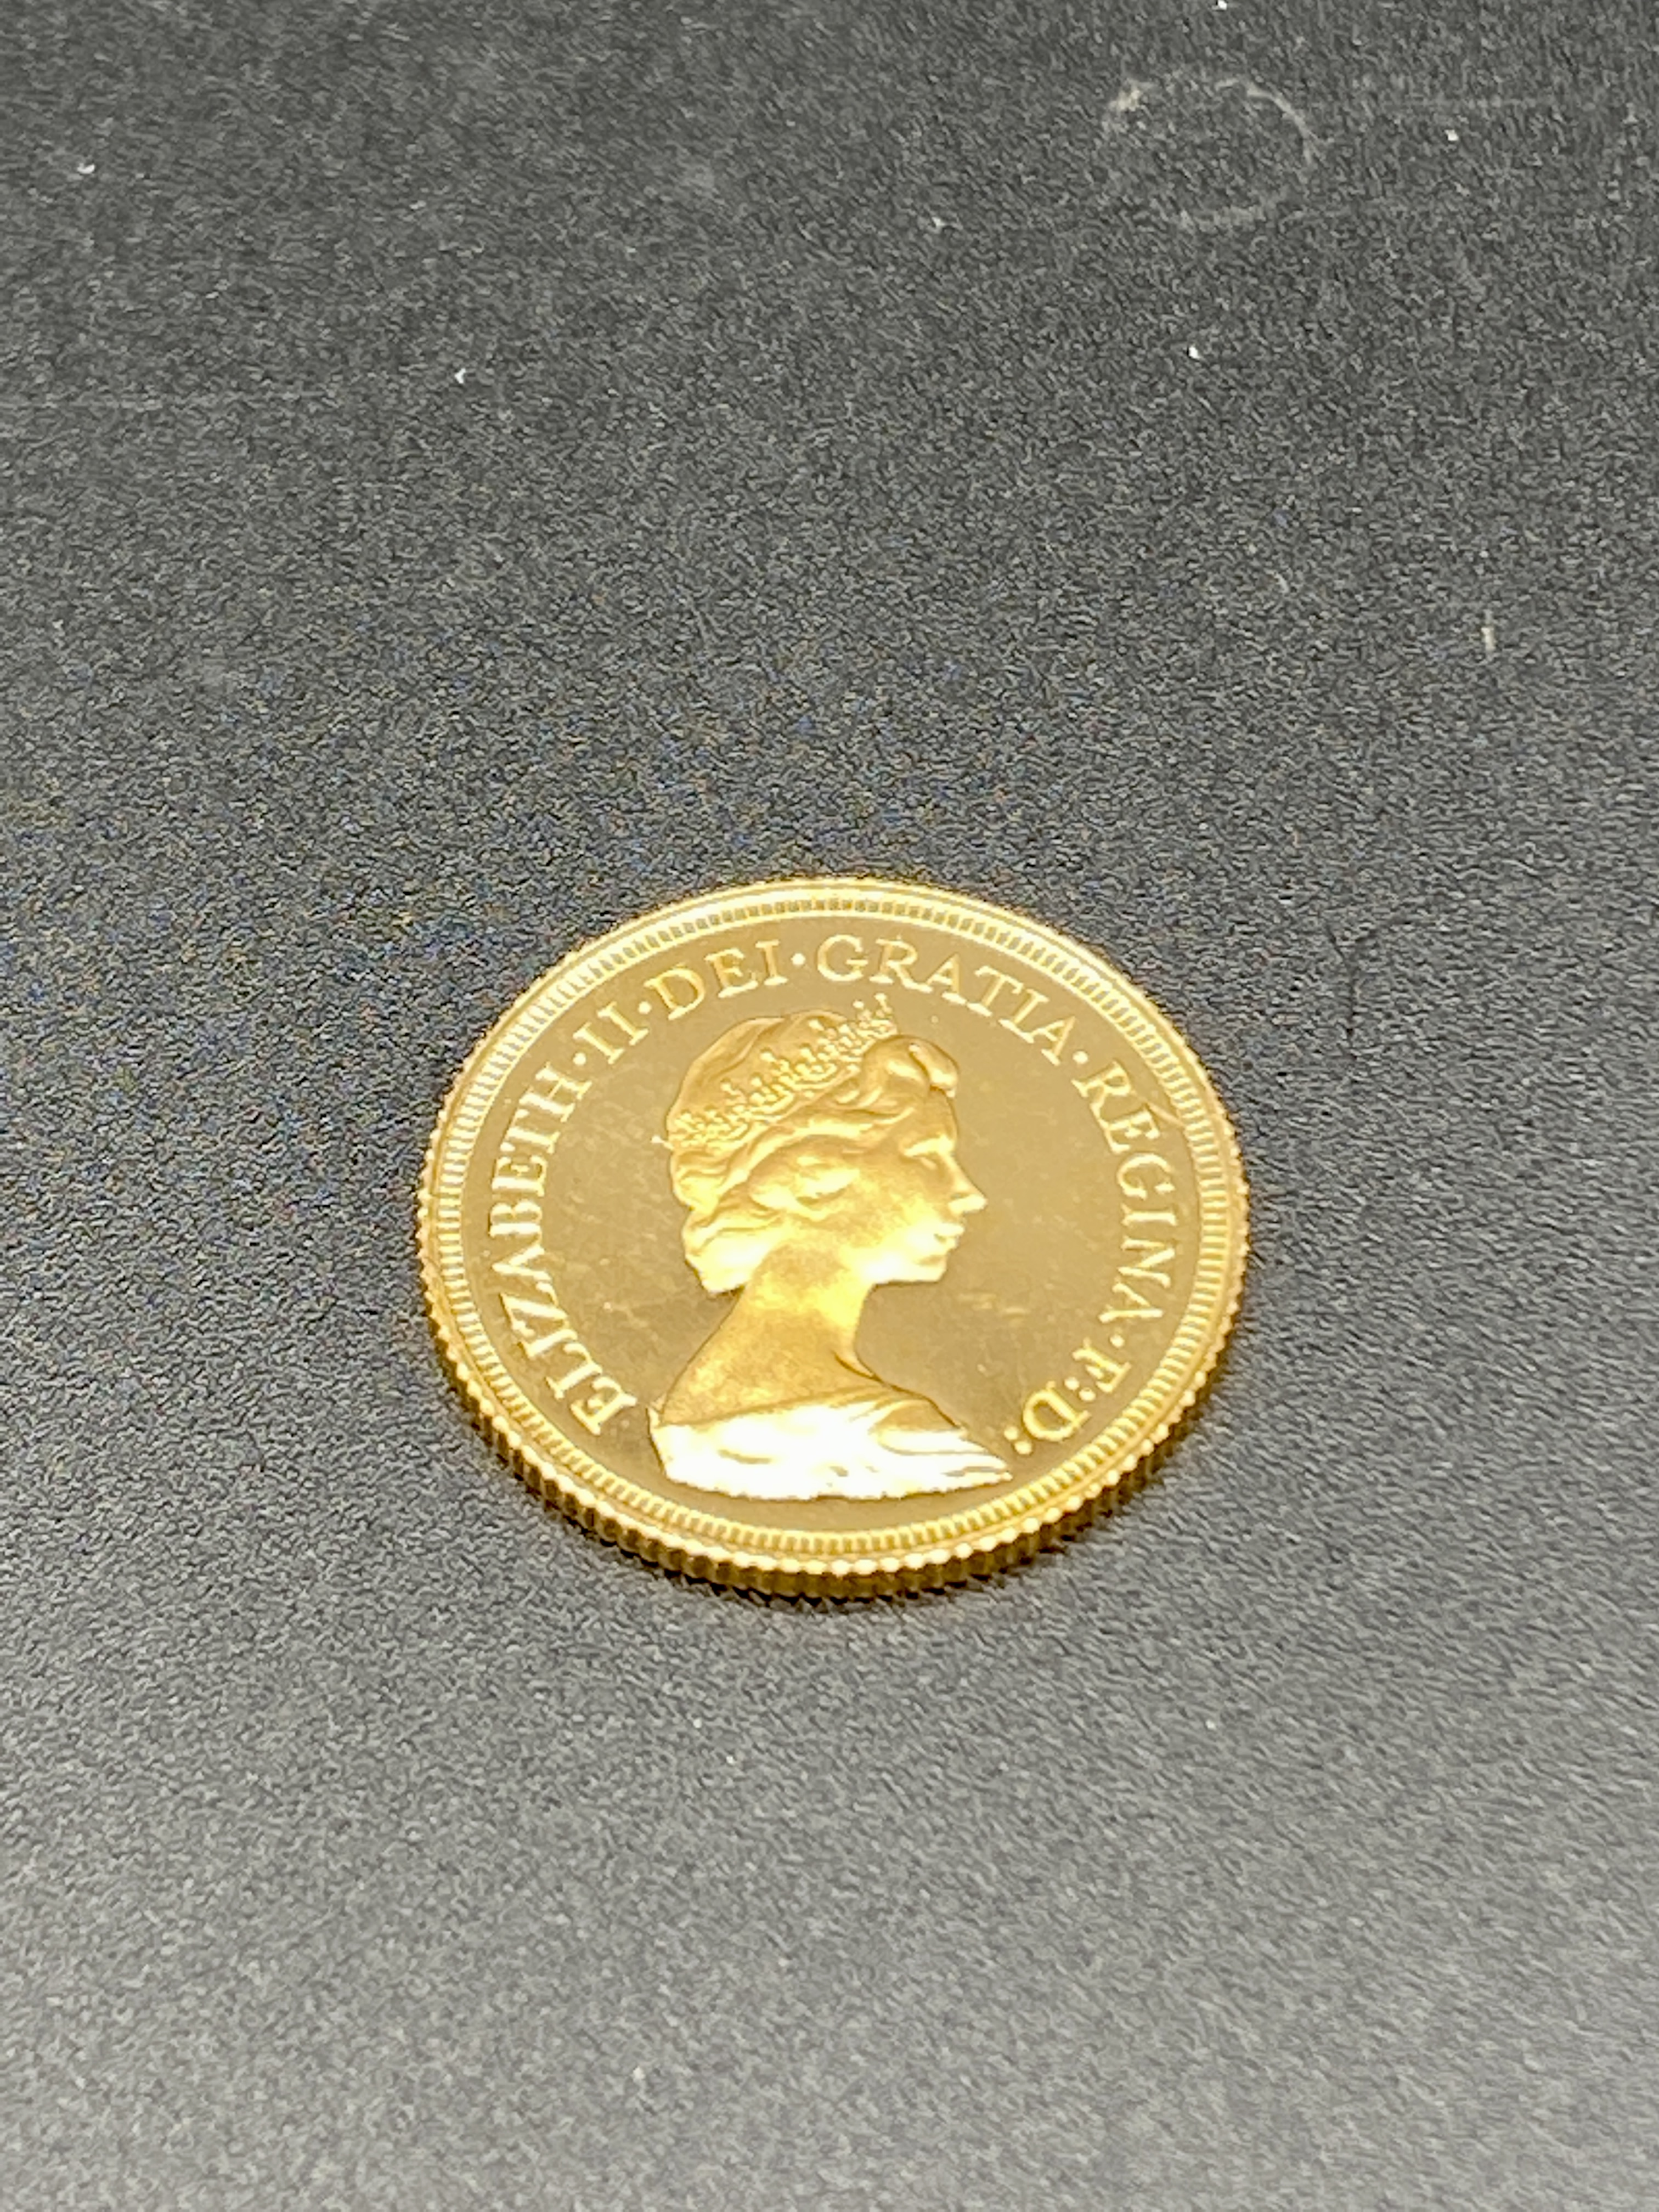 1979 gold sovereign - Image 3 of 3